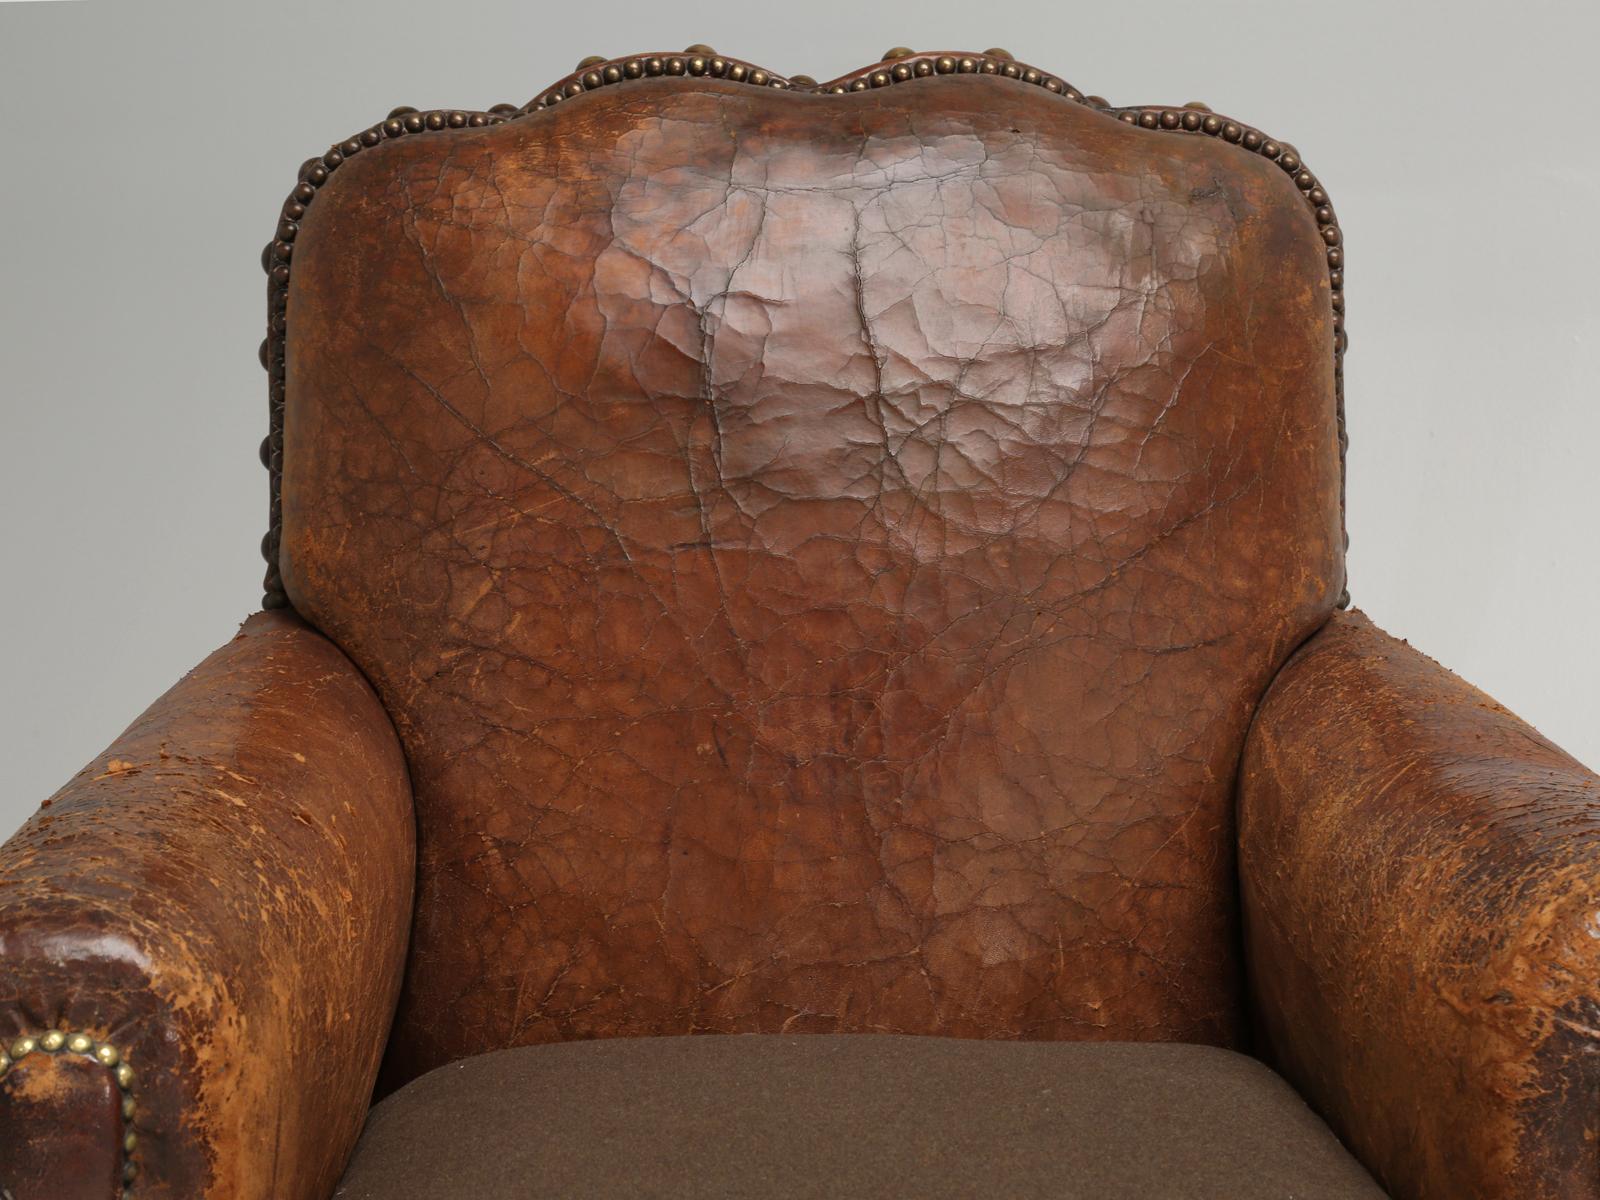 This particular pair of original French leather club chairs are the classic definition of; you can’t tell a book by its cover. By that I mean, everything under the skin of that scruffy 90-year old French leather, has been painstakingly restored in a